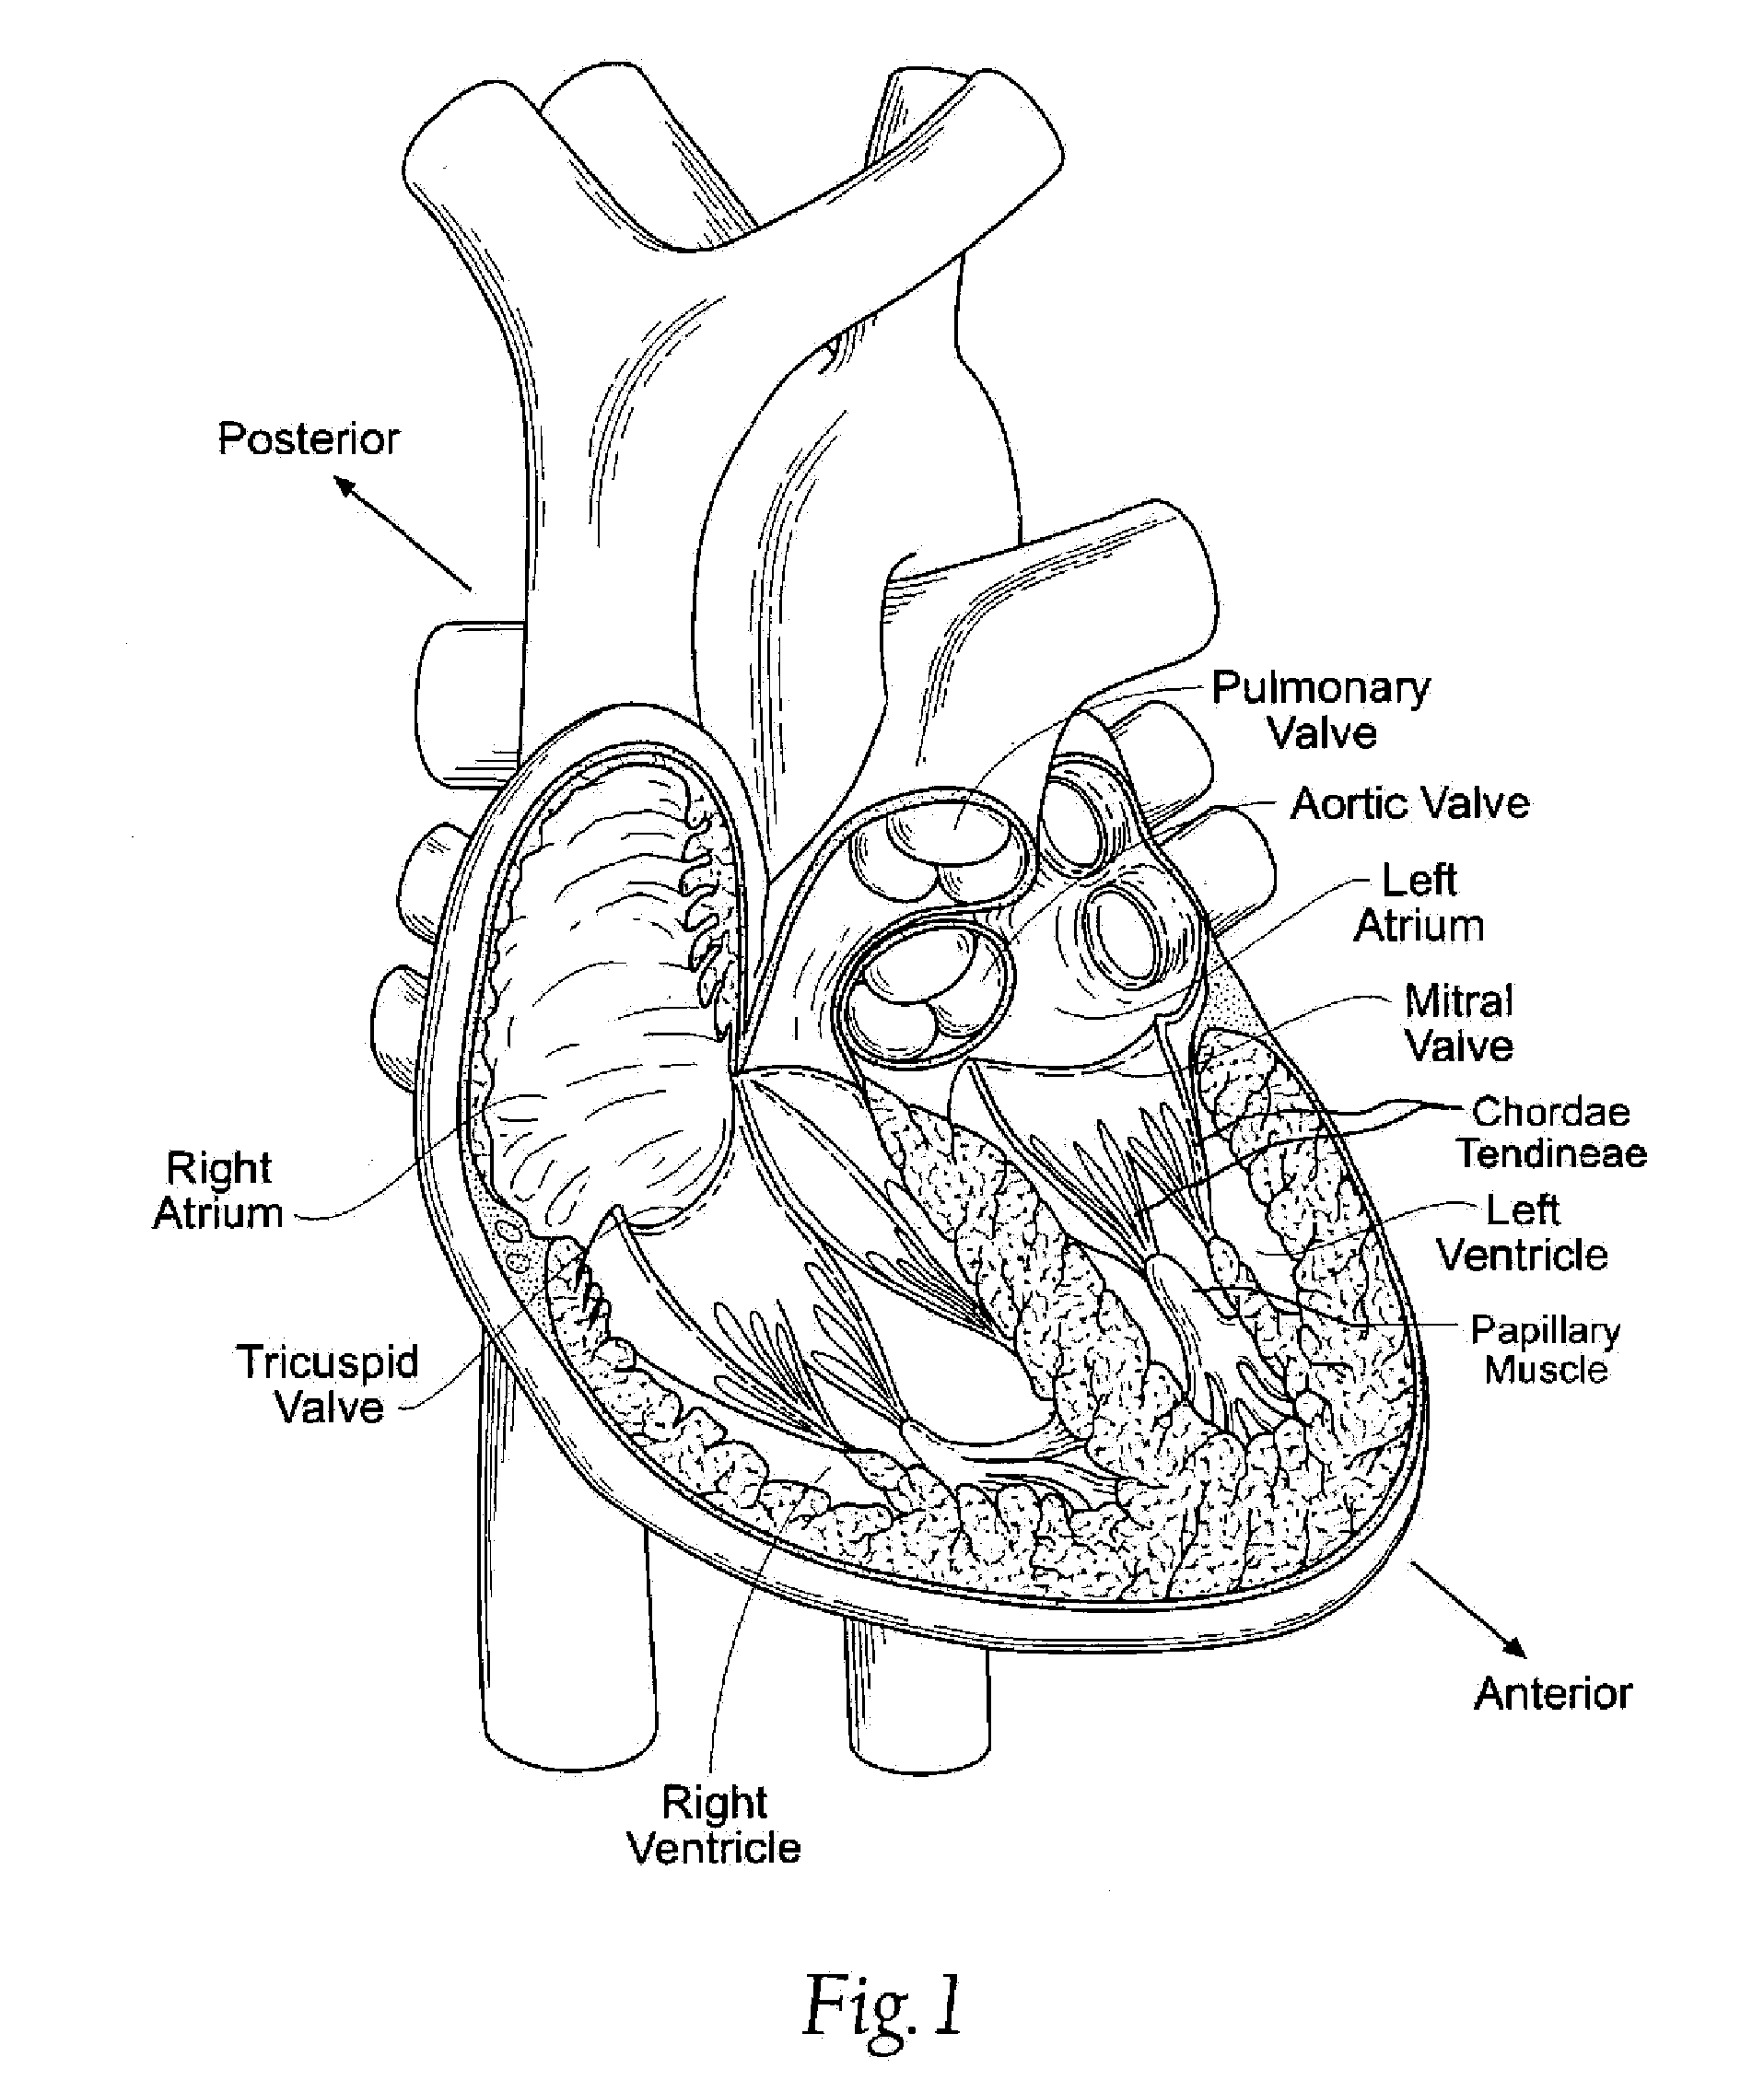 Unitary quick connect prosthetic heart valve and deployment system and methods